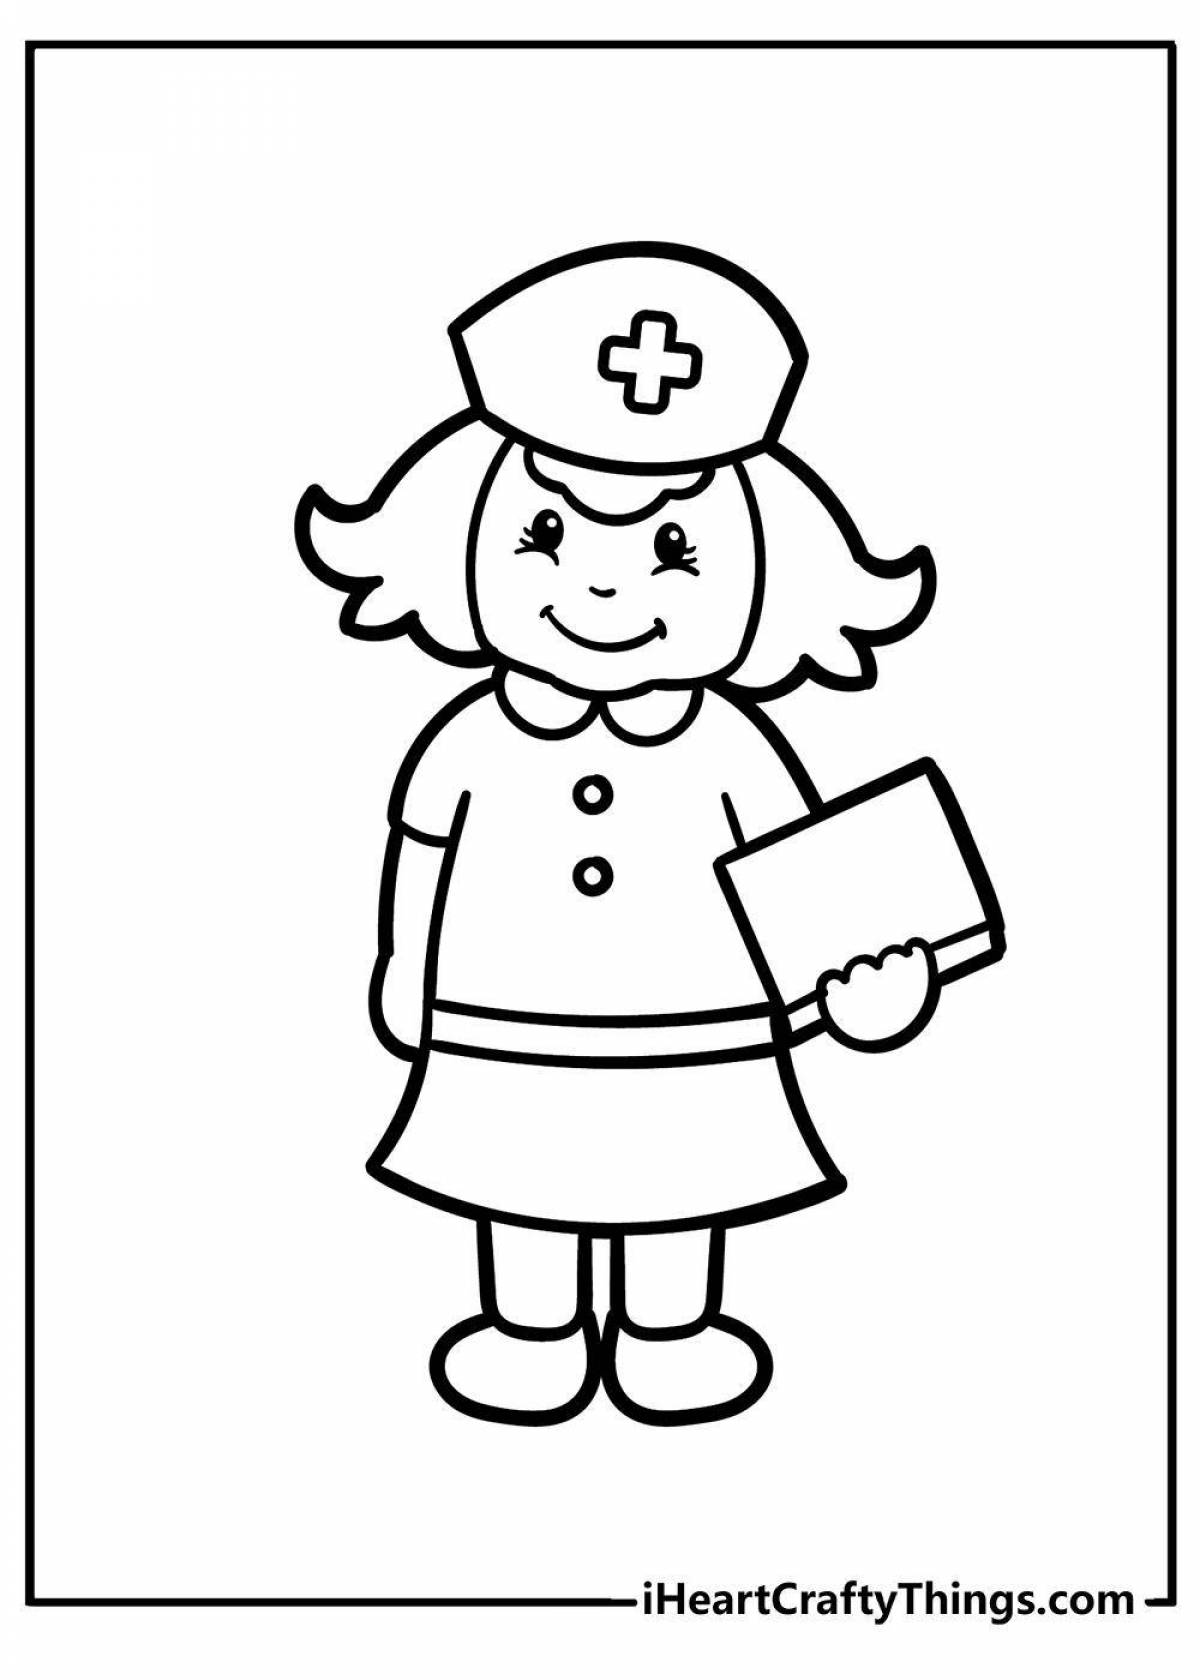 Caring nurse coloring for kids